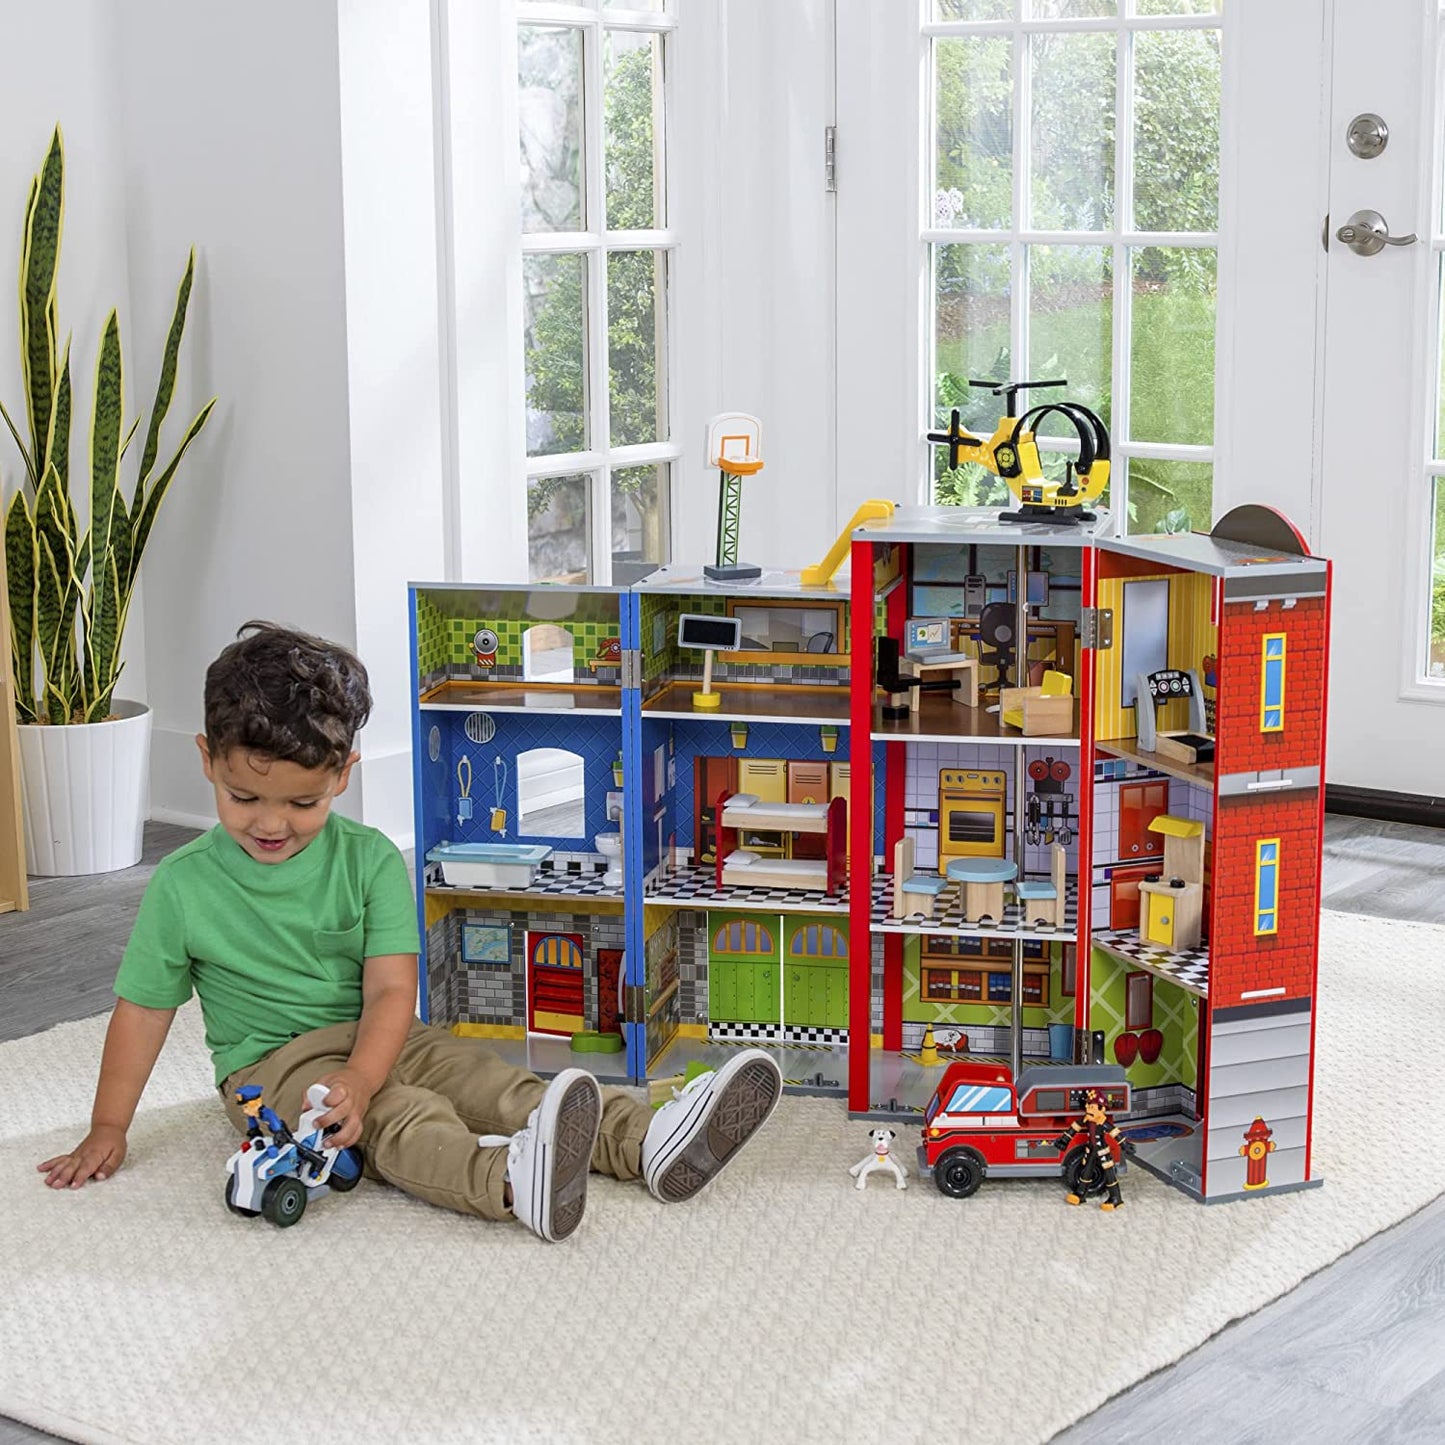 Everyday Heroes Play Set for kids - image2